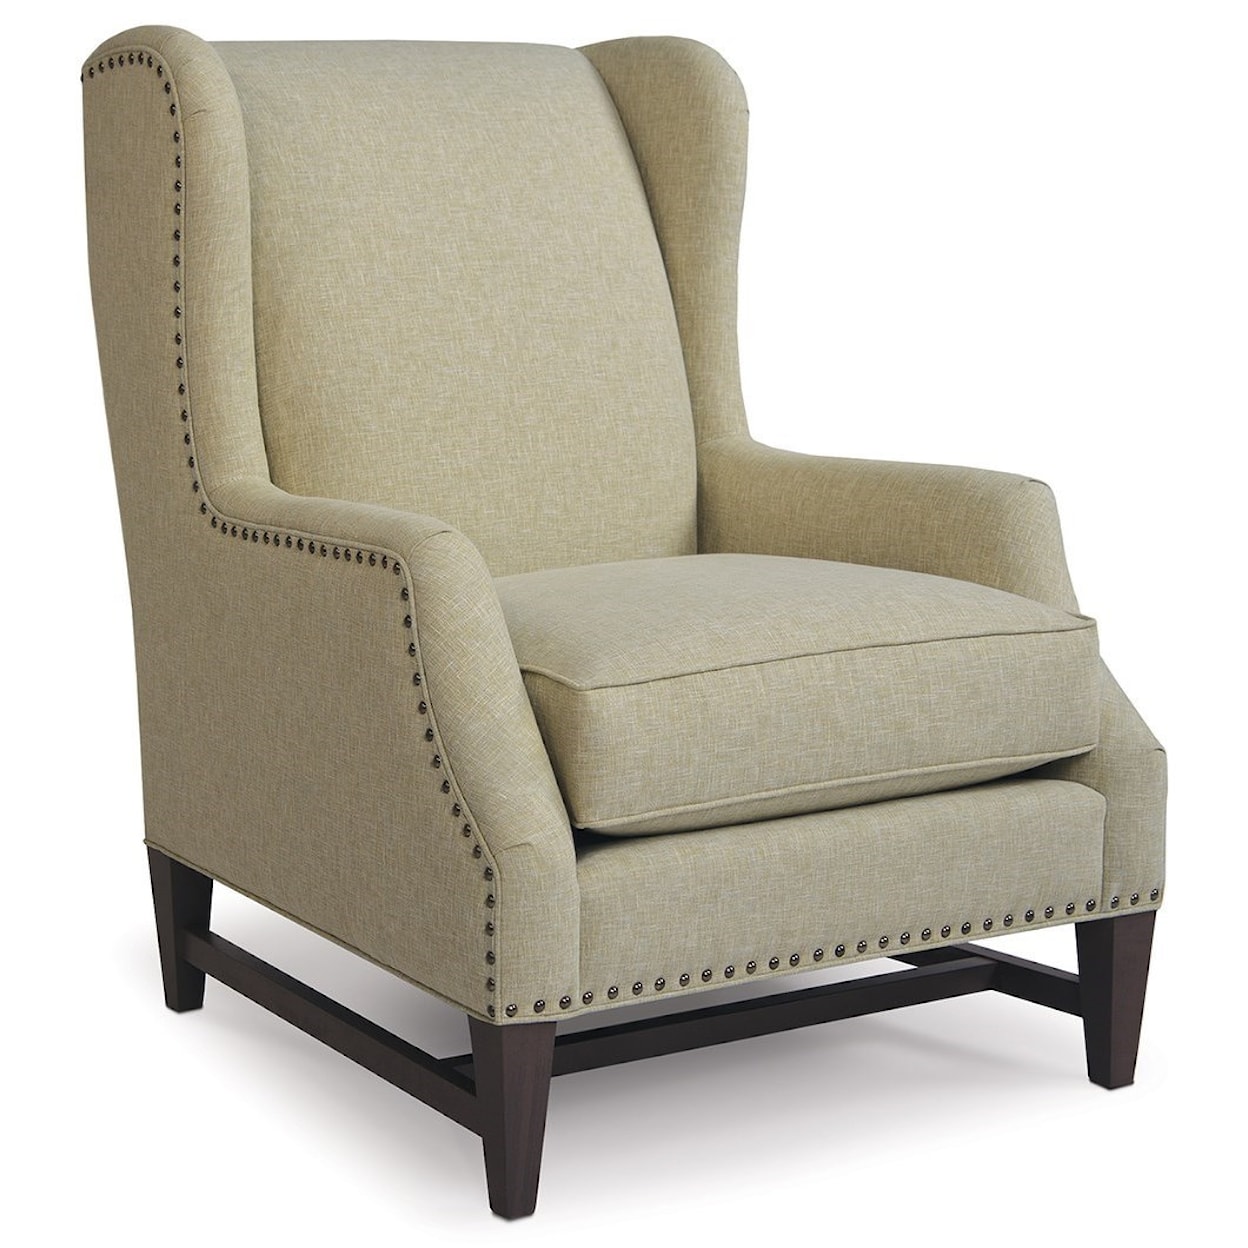 Smith Brothers 543 Chair